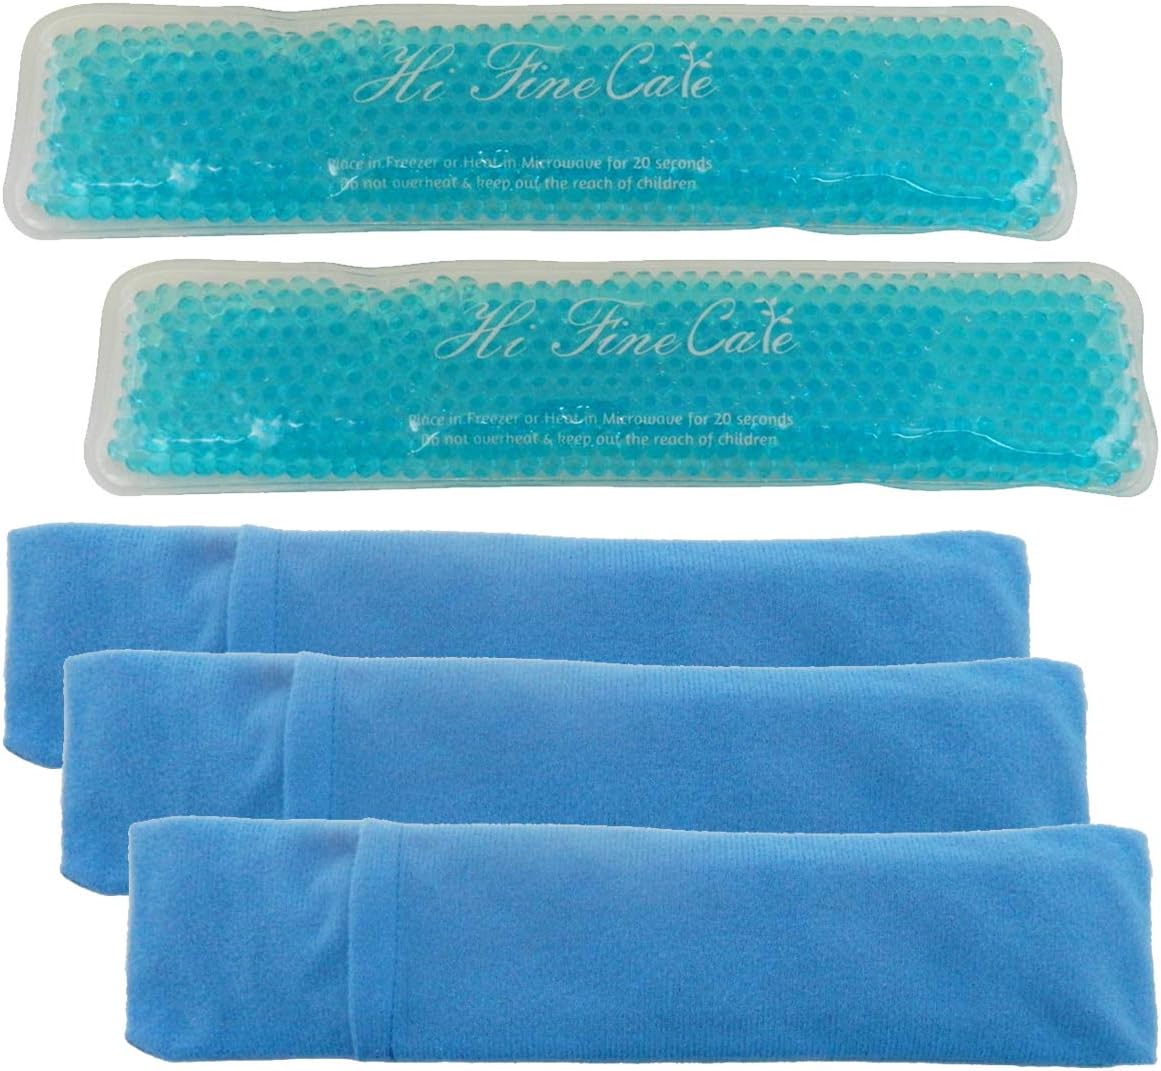 Perineal Cooling Pad, Postpartum Cold Packs Gel Bead Ice Pack Cold Therapy for Women After Pregnancy and Delivery, 2 Ice Pack and 3 Cover (Blue Gel Bead Ice Pack)